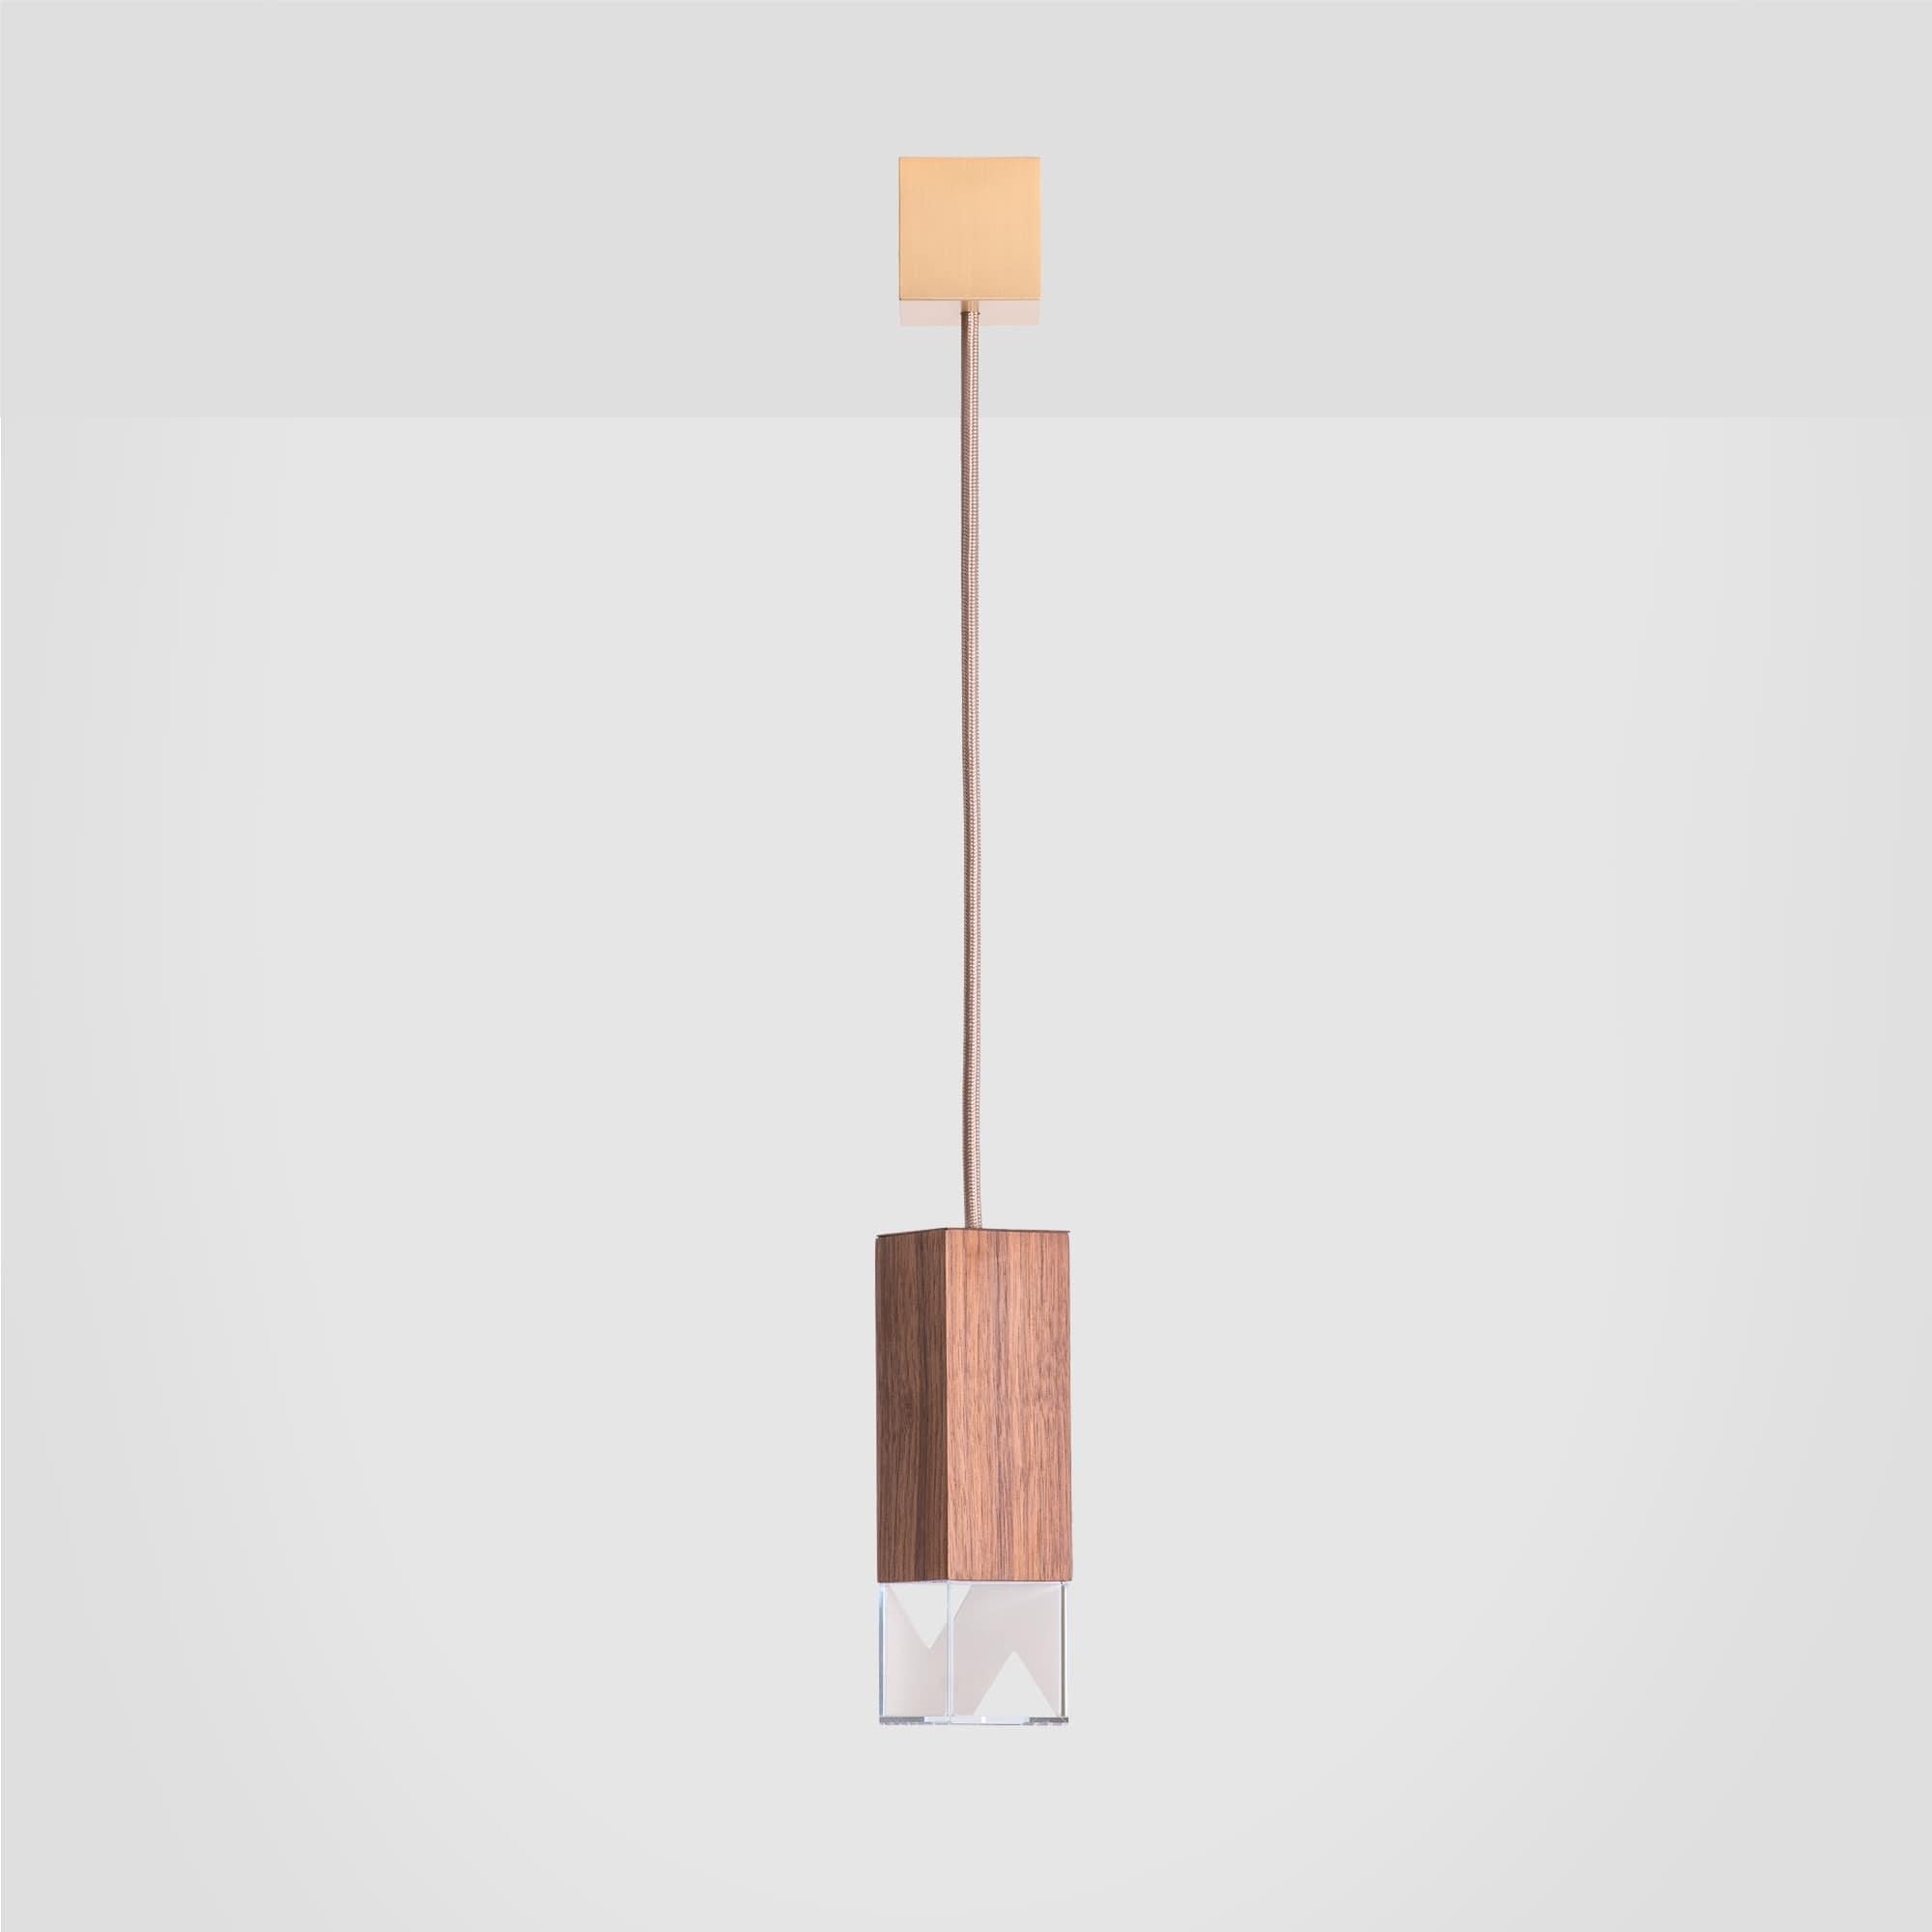 Lamp one in brass by Formaminima
Dimensions: 5 x 5 x H 17 cm
Materials: Lamp body available in solid Canaletto walnut, oil finish

Ultra-thin anti-reflection crystal diffuser
Inside-diffuser Limoges biscuit-finish porcelain sheets
Satin brass